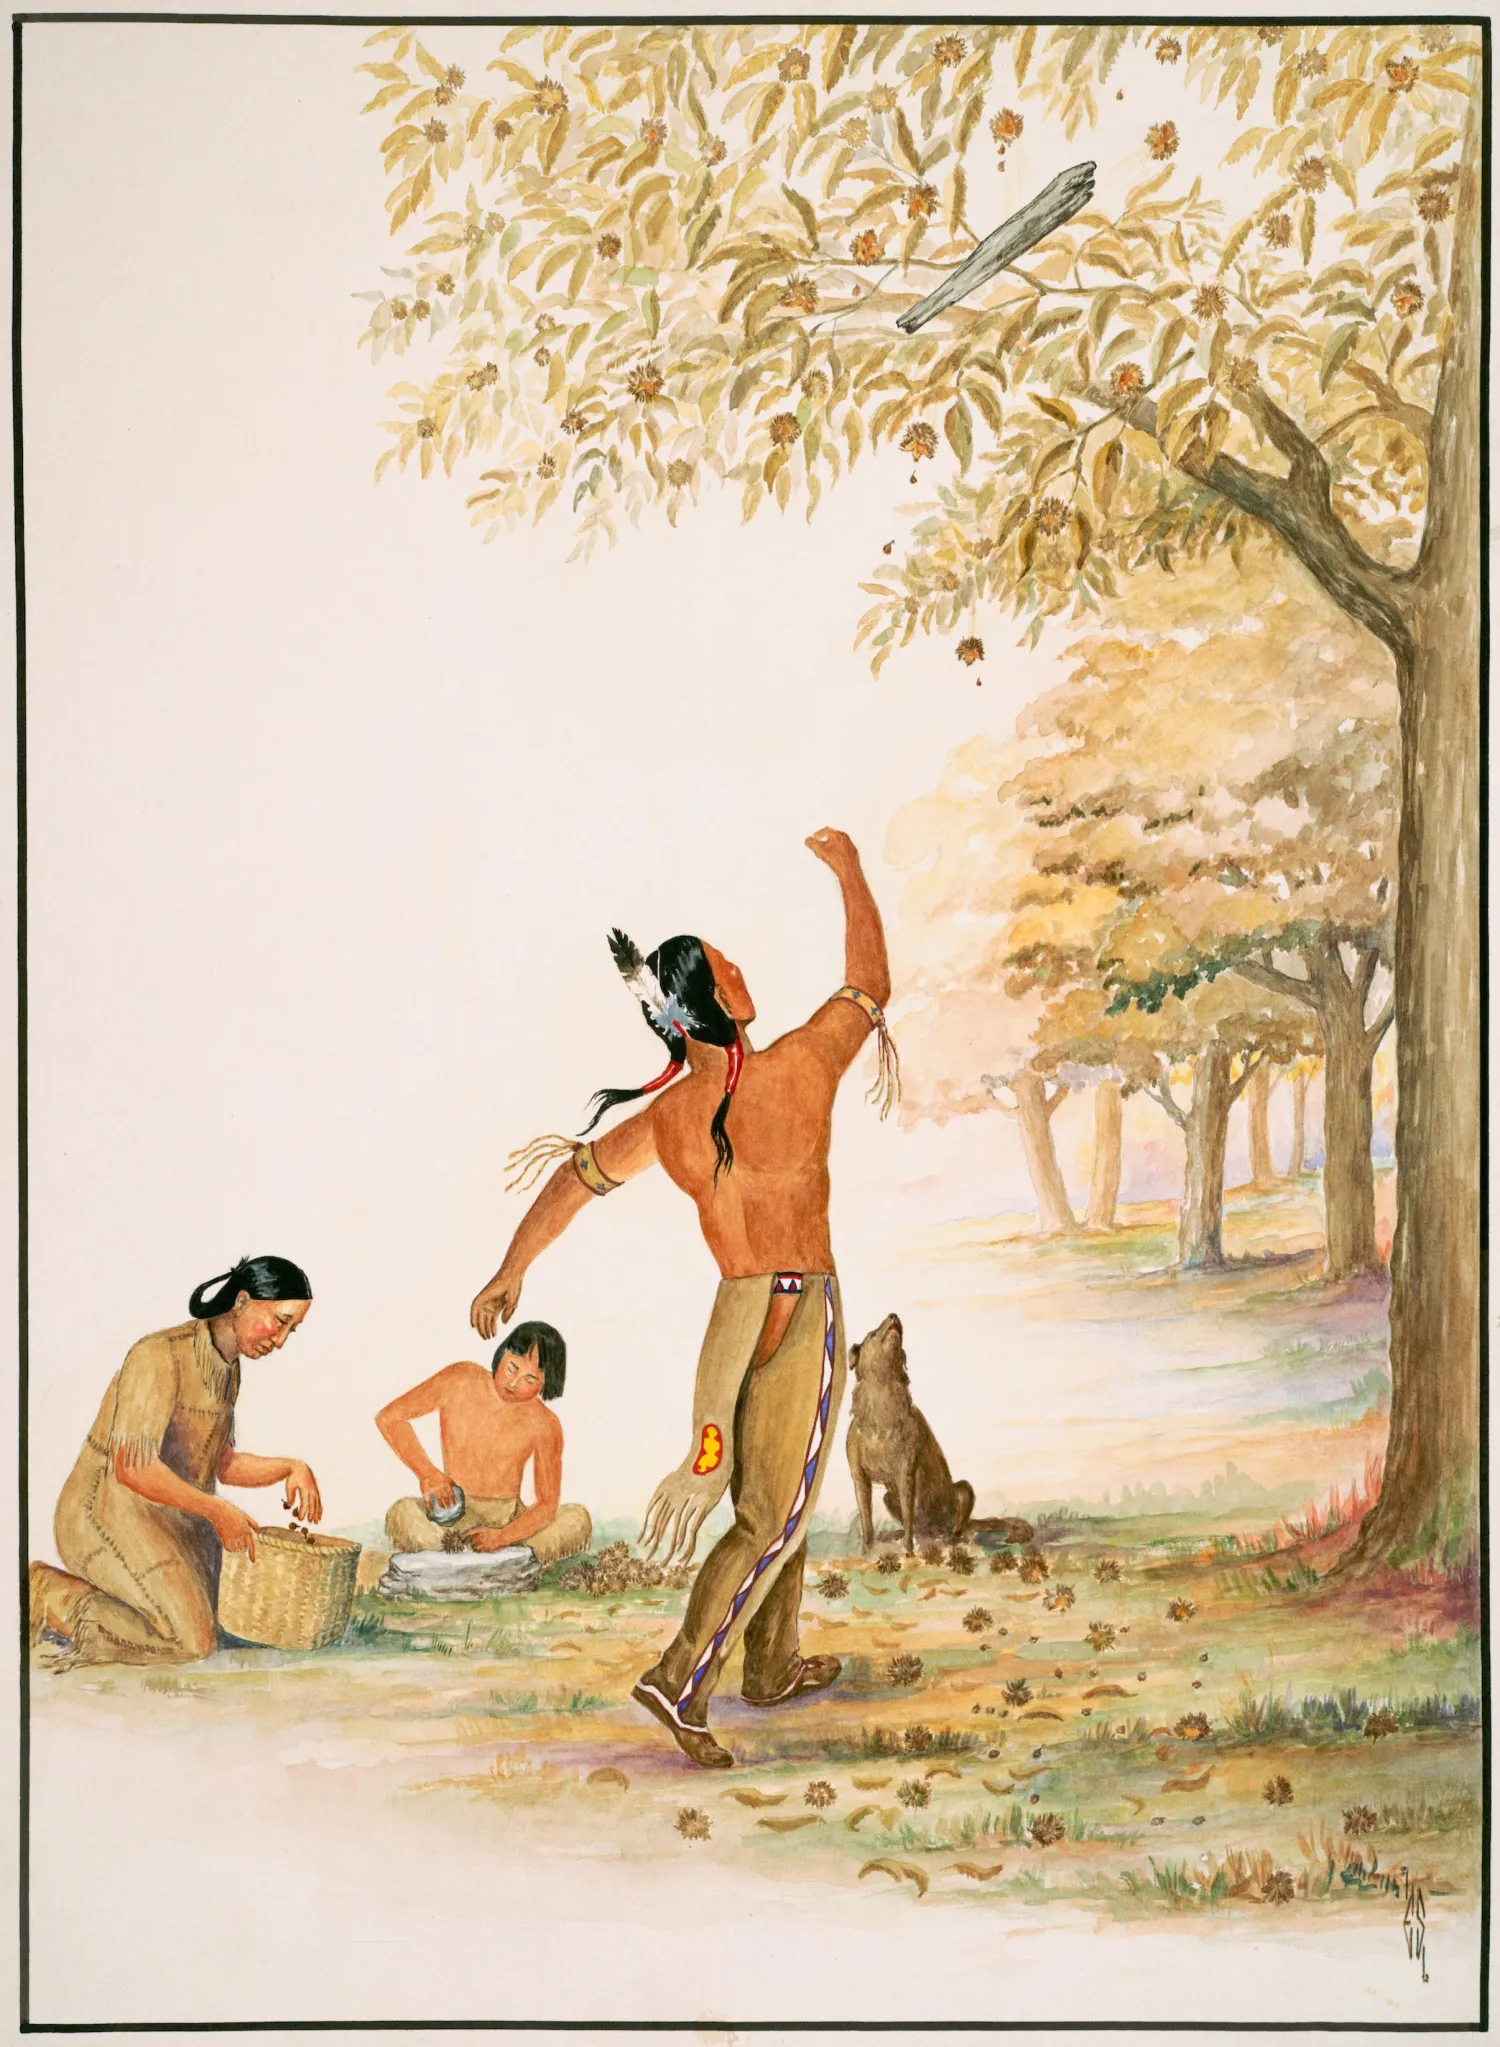 Gathering Chestnuts, painting by Ernest Smith, with permission from the Rochester Museum and Science Center